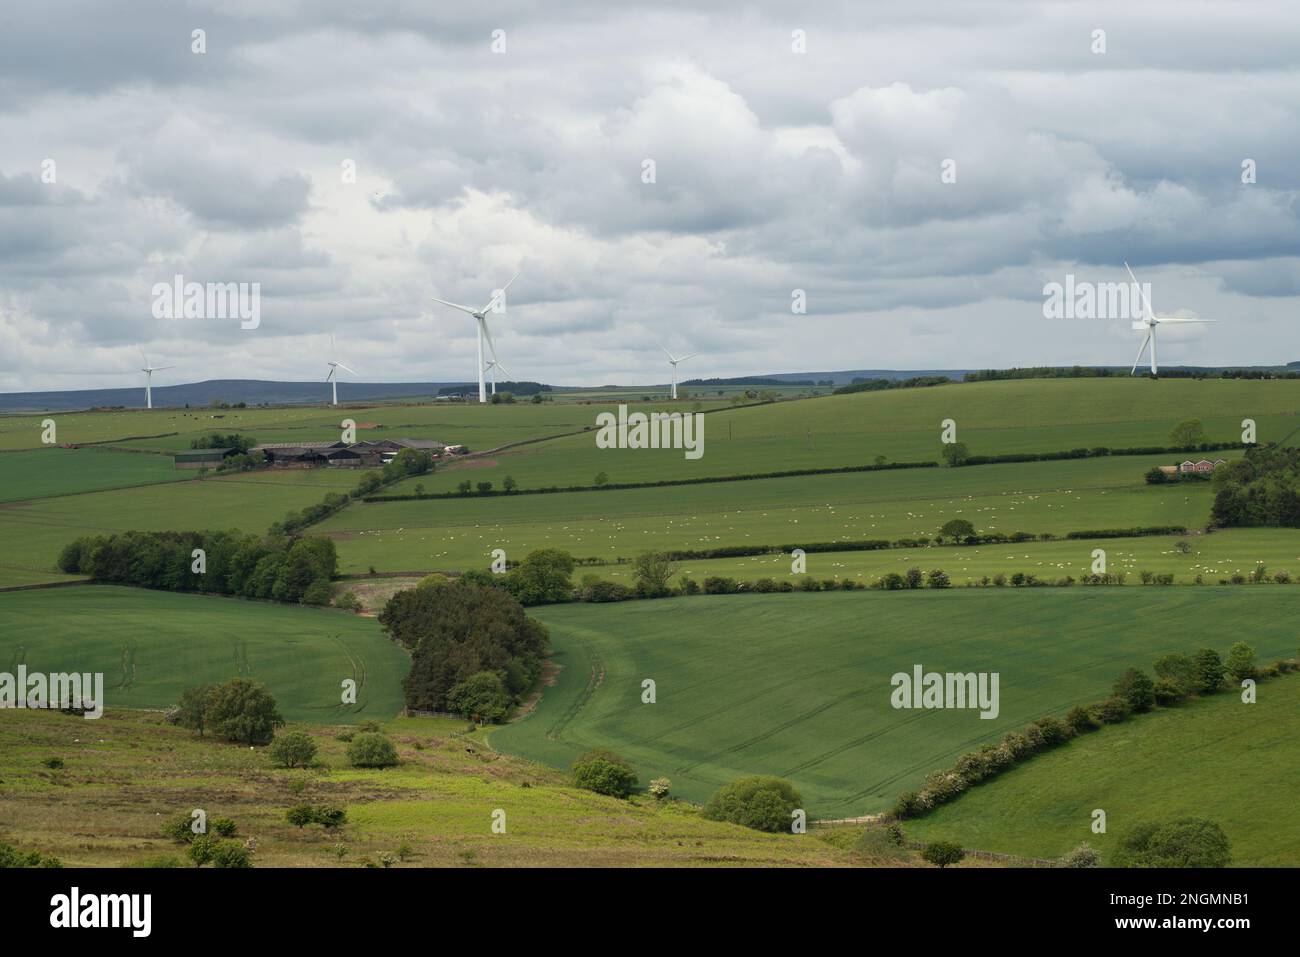 Wind turbines seen across agricultural land in north east England Stock Photo